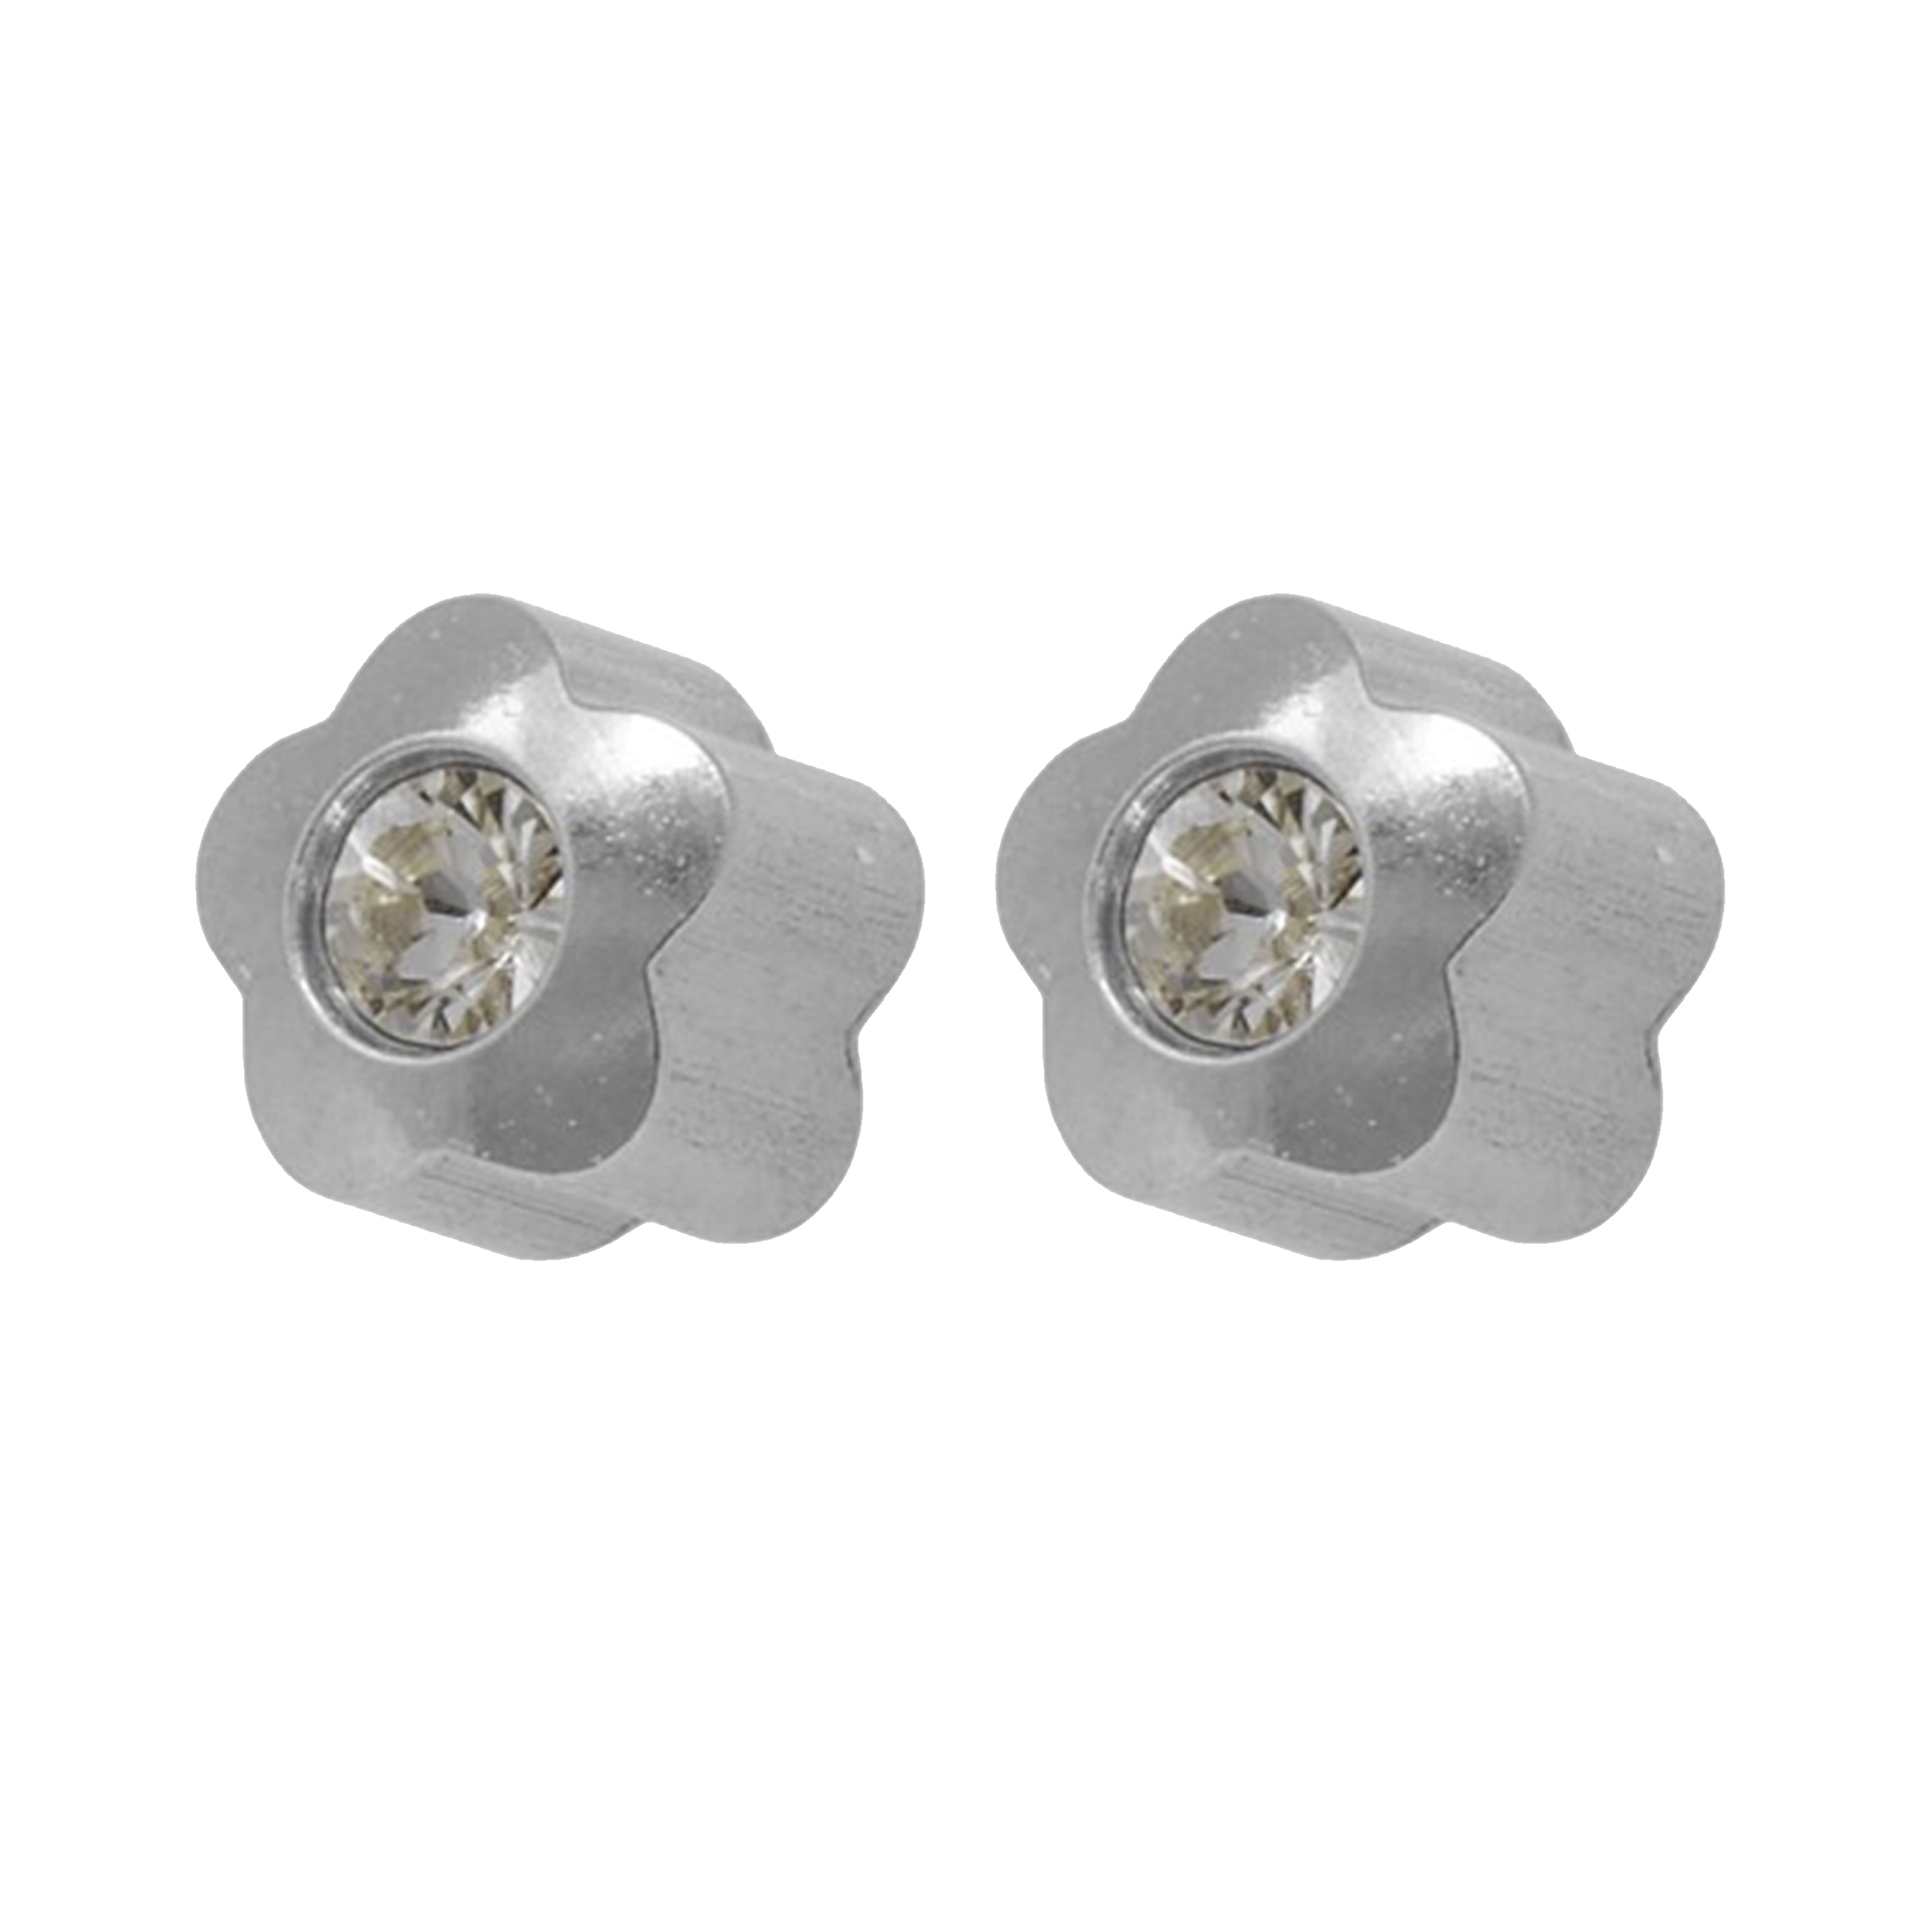 3MM Flower Studs Allergy free Stainless Steel Ear Studs | MADE IN USA | Ideal for everyday wear